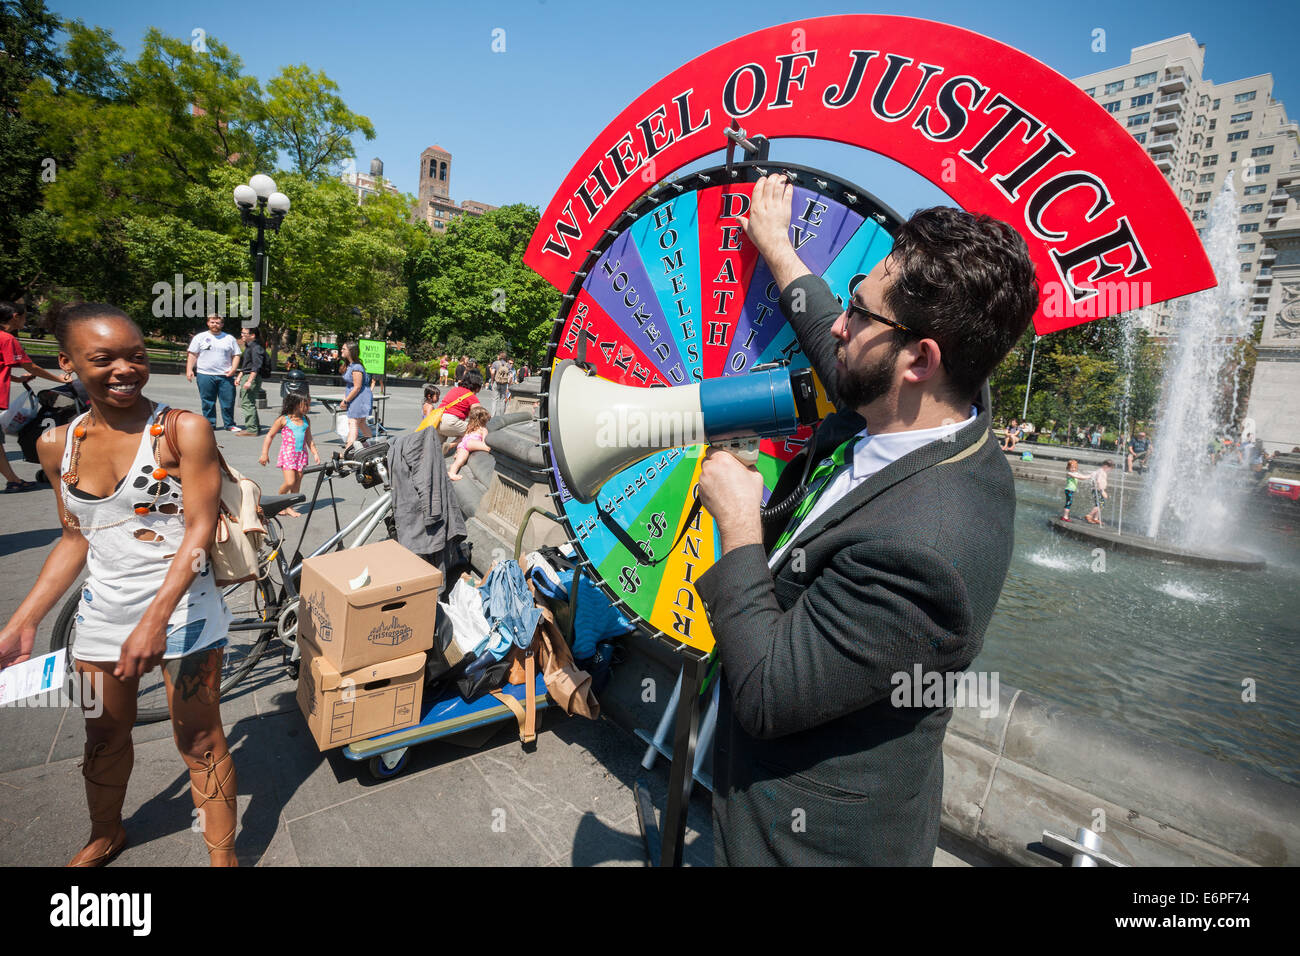 NY Civil Liberties Union's "Wheel of Justice" game in Washington Square Park in New York Stock Photo